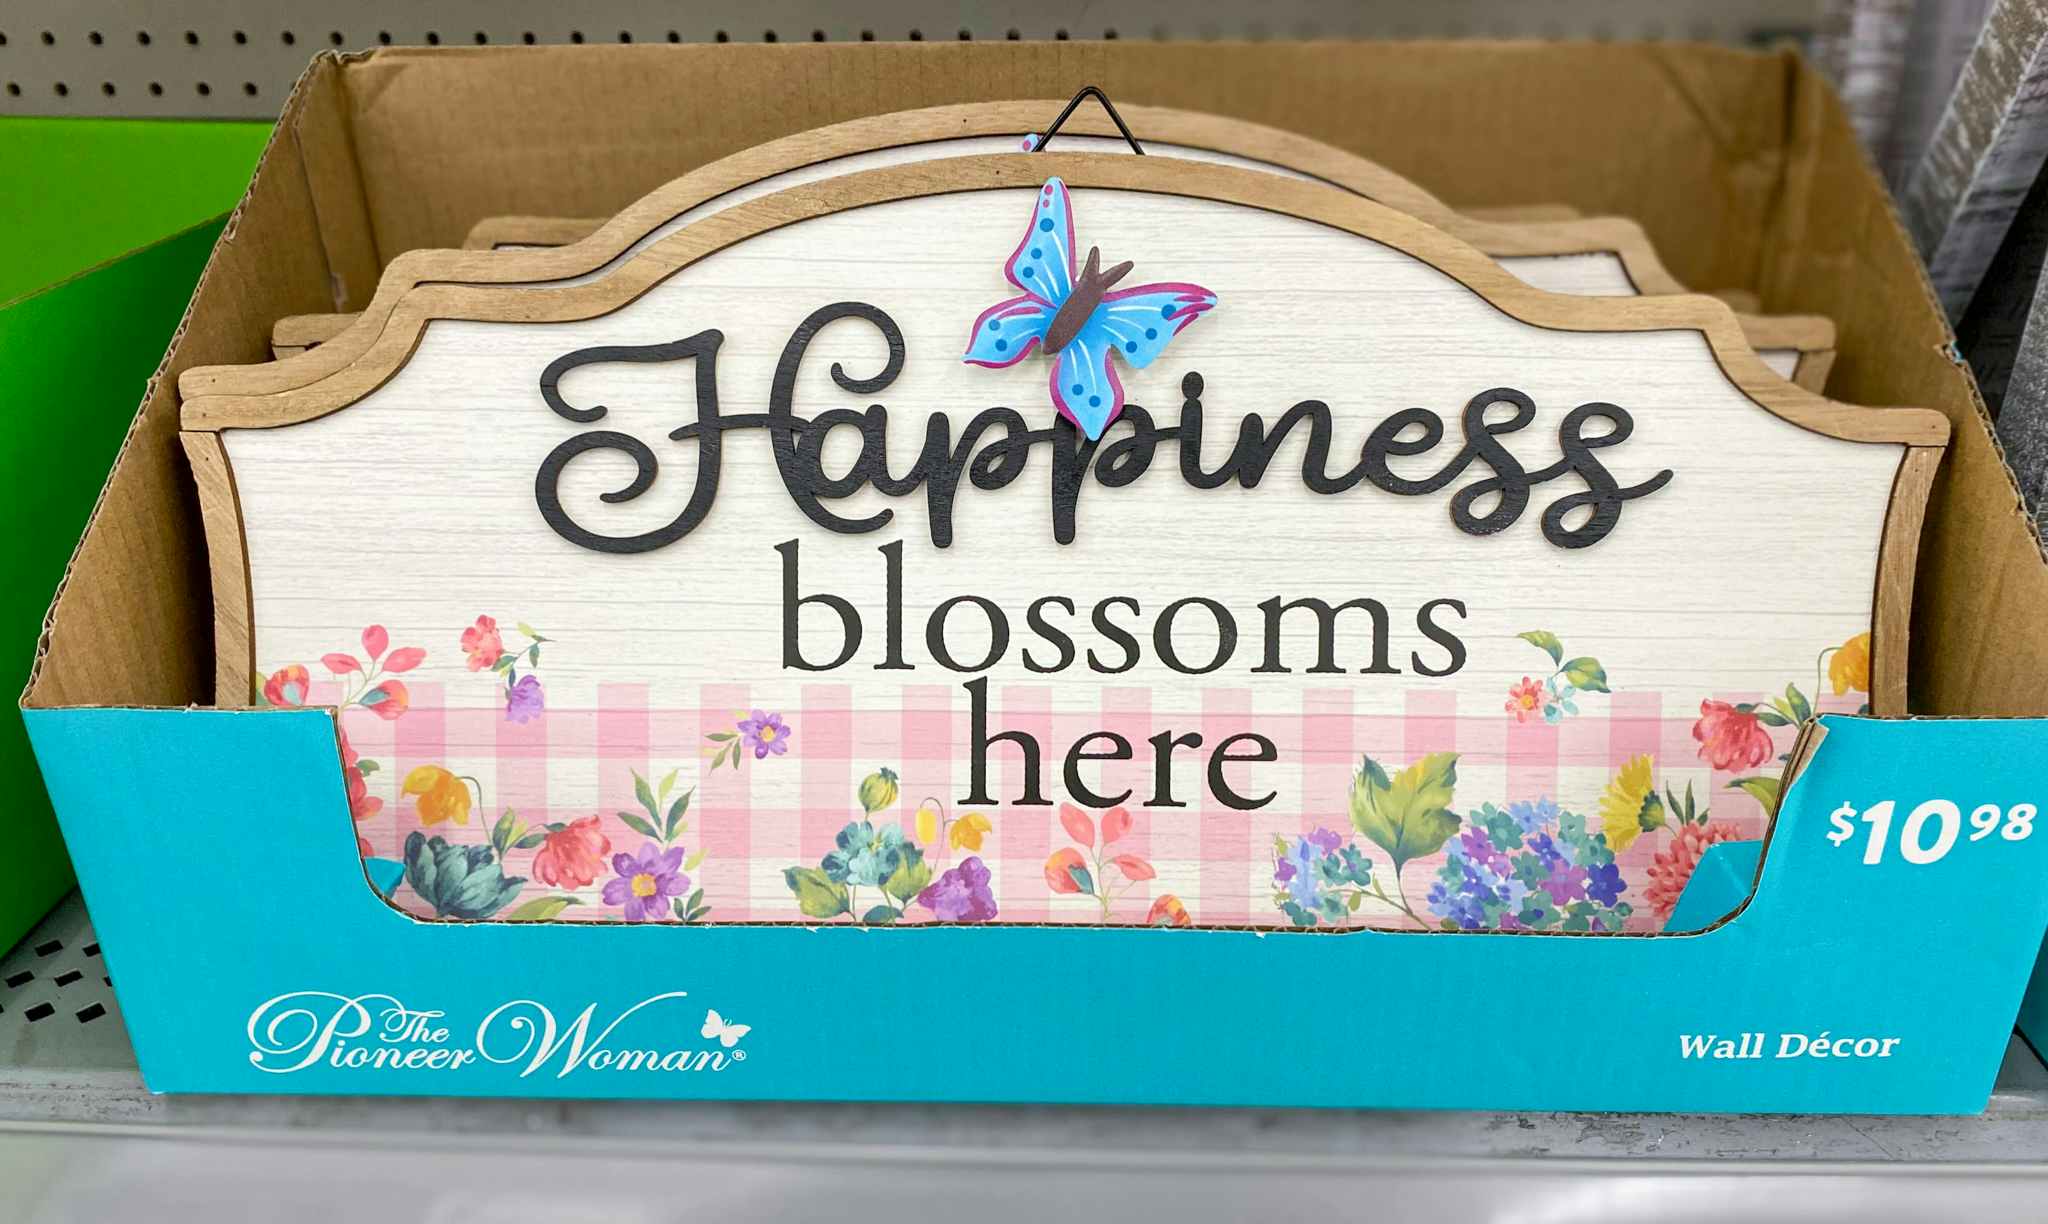 Easter Clearance at Walmart